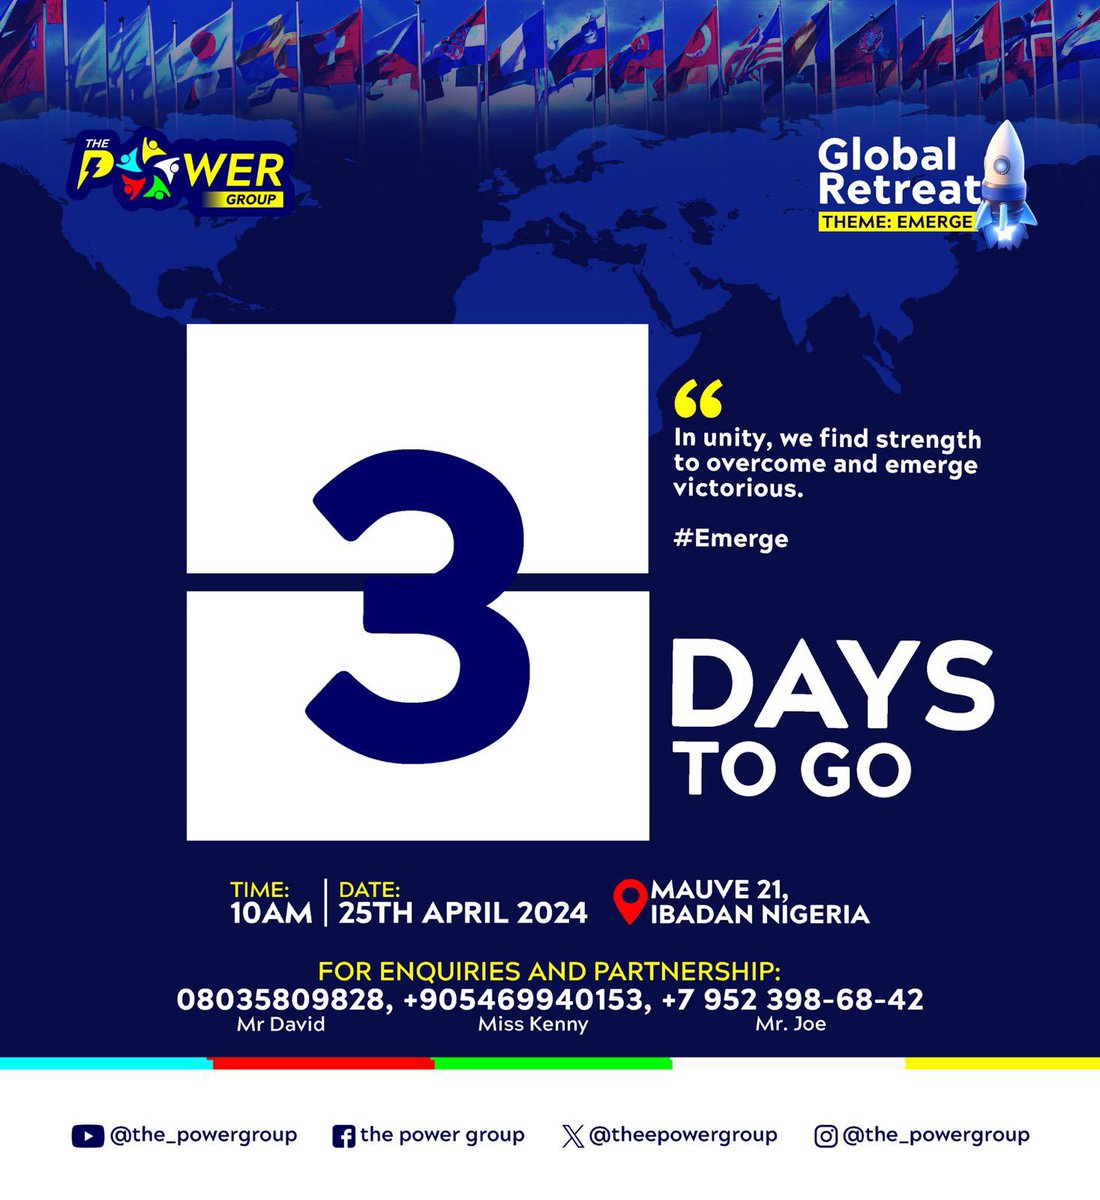 3 days more to the big day!
.
Have you ever heard of a unified front? Well experience this first hand at the Global Retreat and watch yourself EMERGE victoriously.
. 
Good news, REGISTRATIONS are still on!
.
.
@theepowergroup @toluoluwo
#thepowergroup #globalretreat #emerge2024